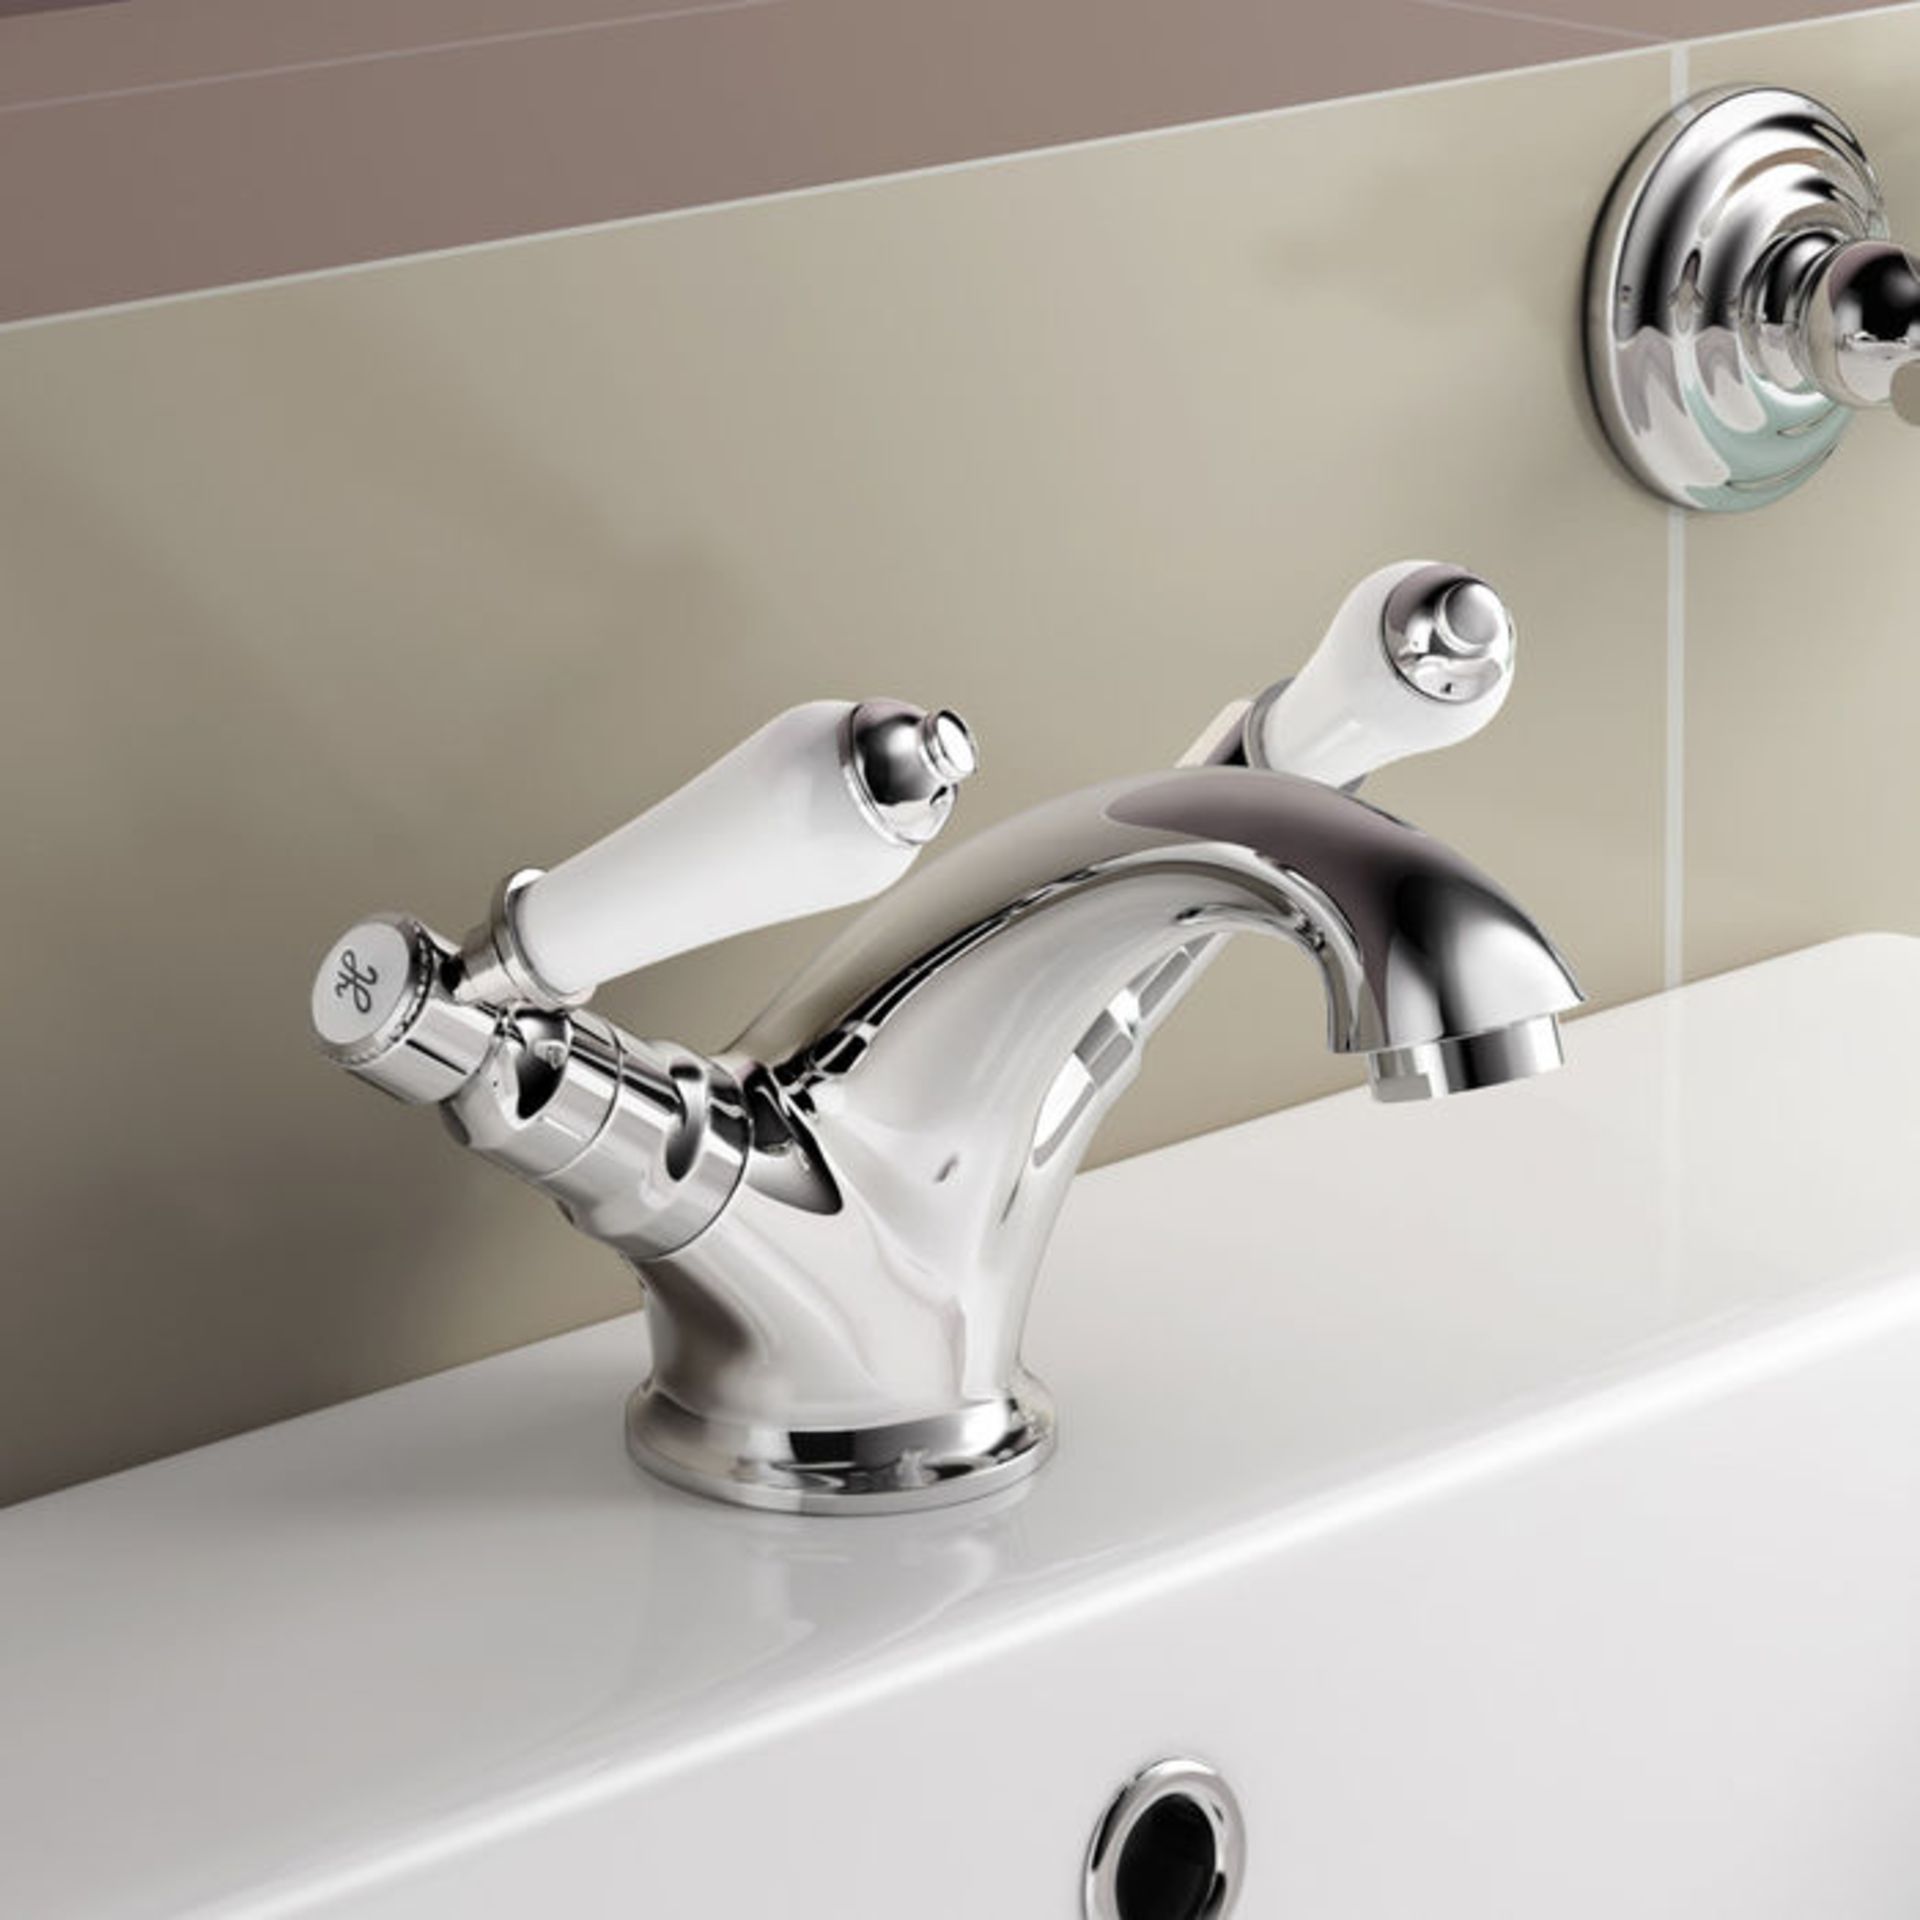 (GR90) Regal Chrome Traditional Basin Sink Lever Mixer Tap. Chrome Plated Solid Brass Mixer - Image 2 of 4